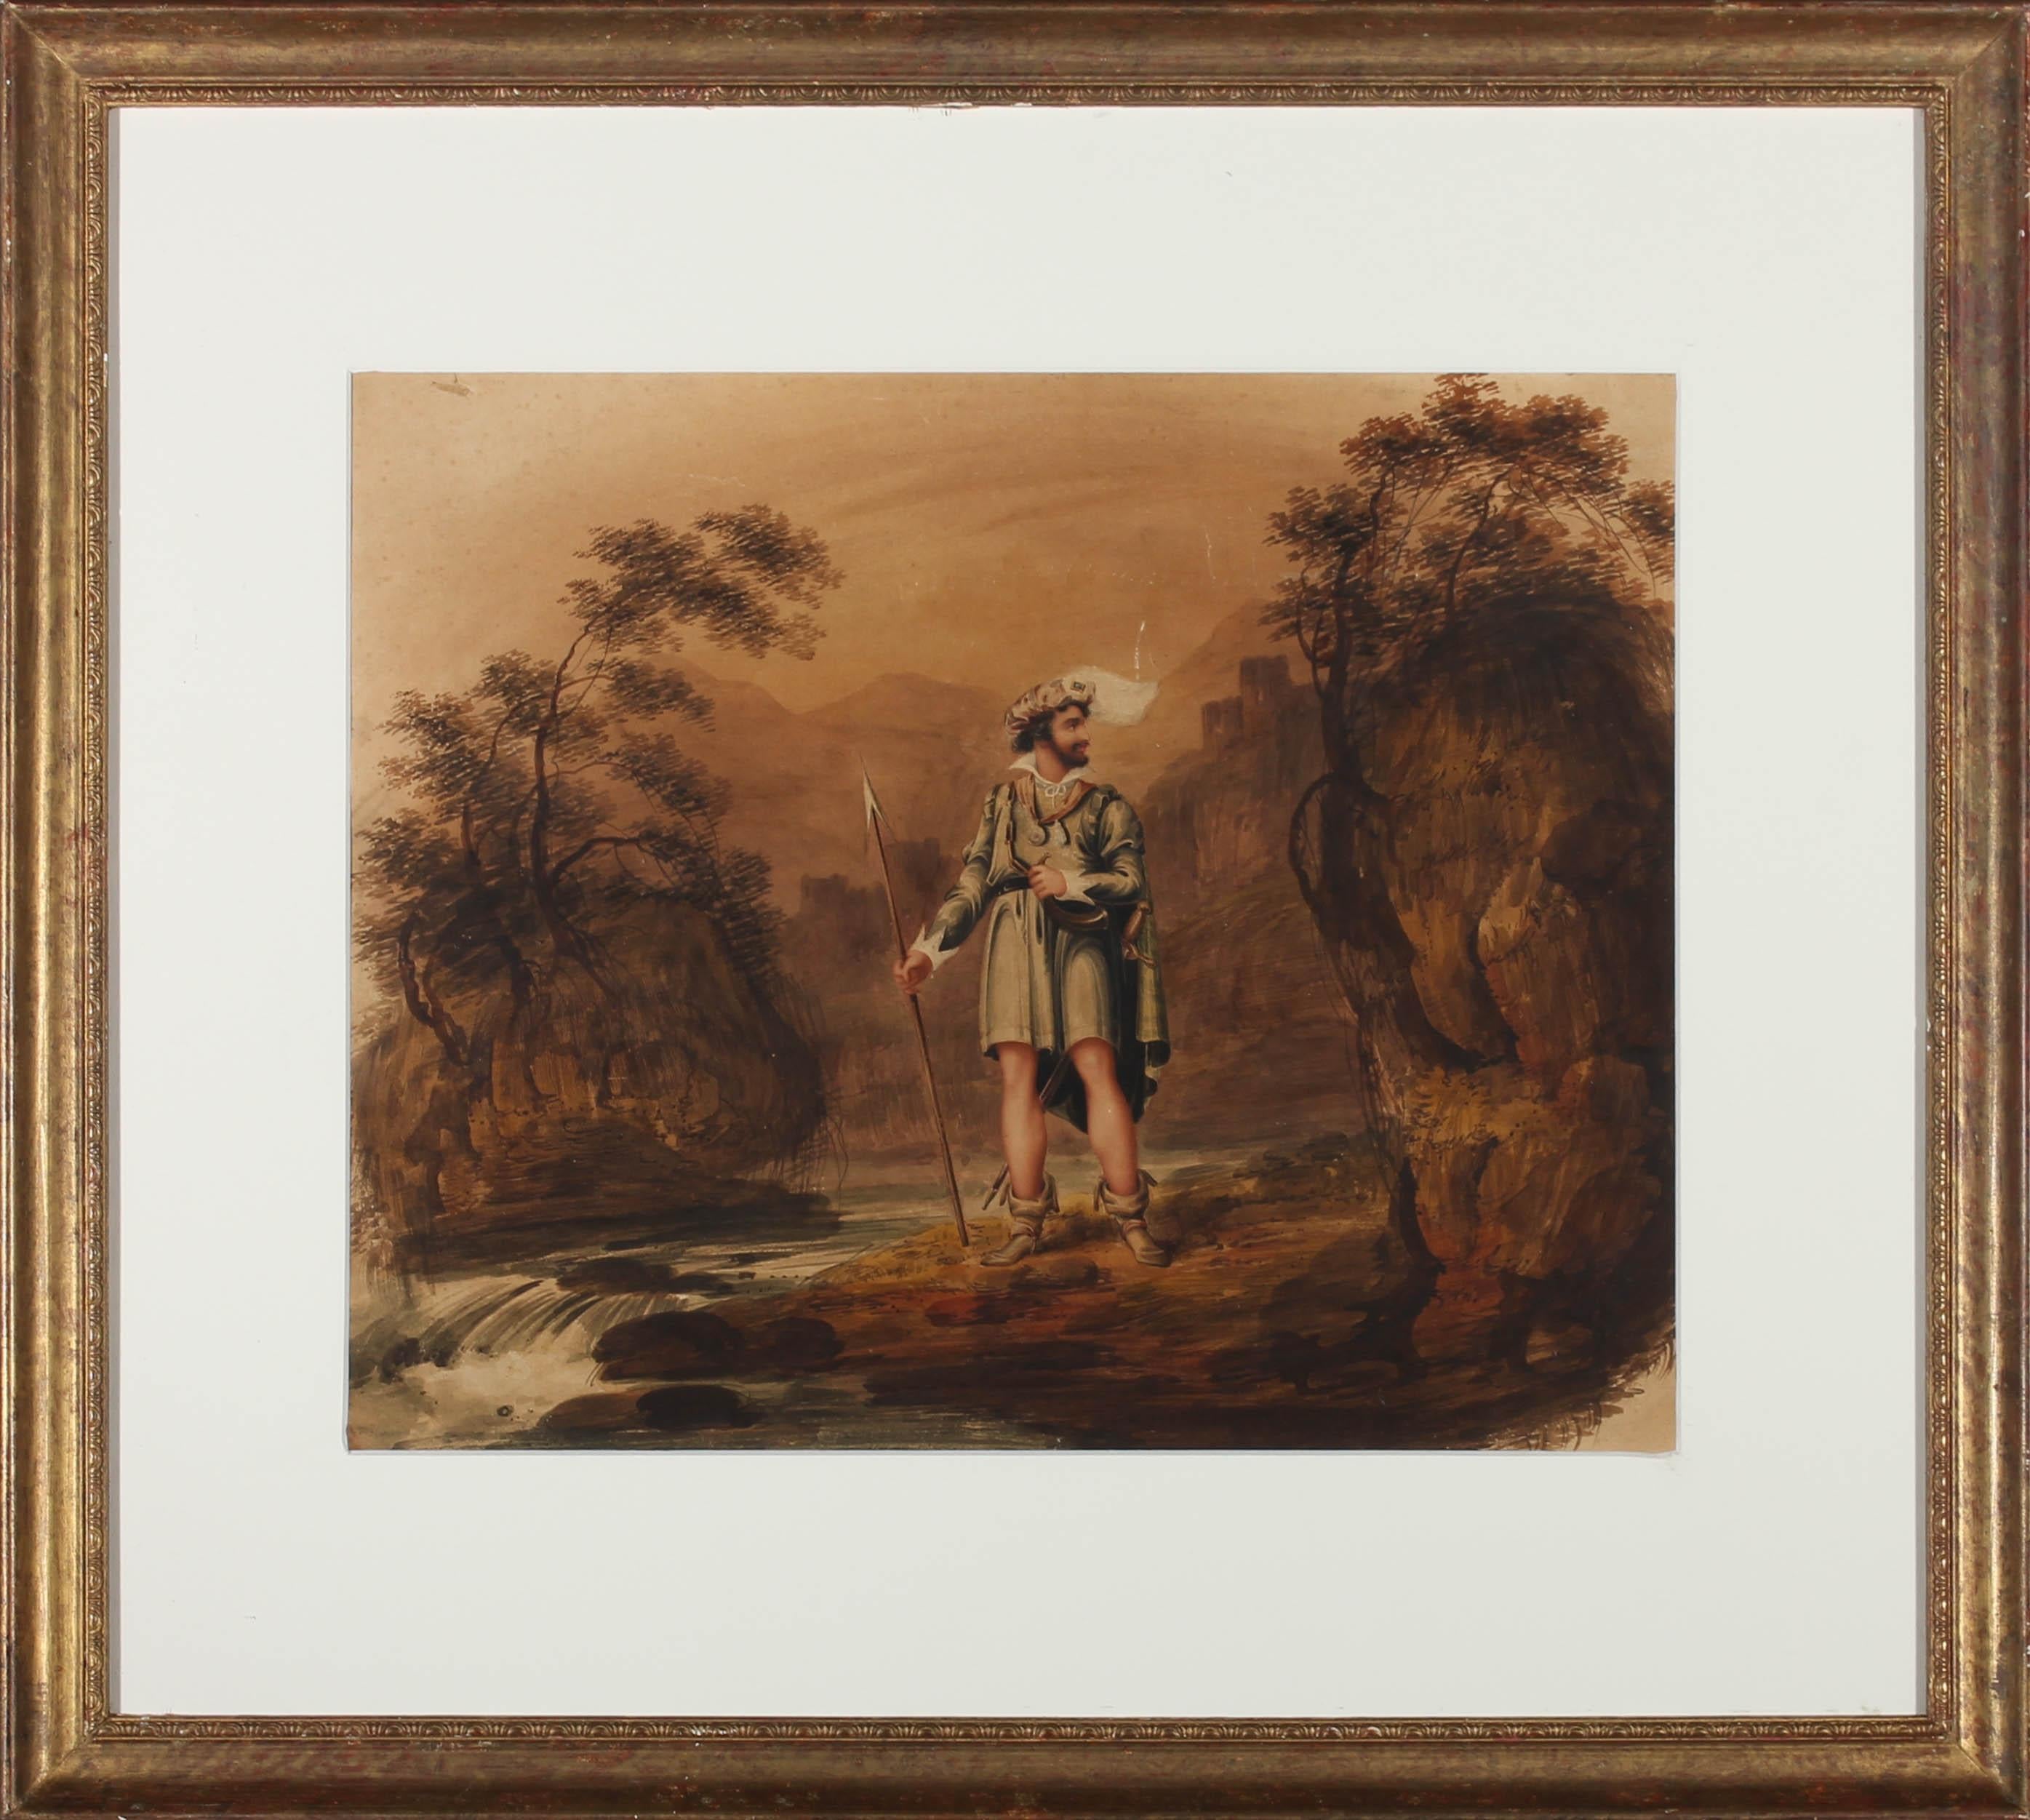 A fine watercolour composition of a gentleman in a landscape. Signed, titled and dated London 1818 verso. Well presented in a brushed gilt frame, with white card mount. Glazed. On wove.